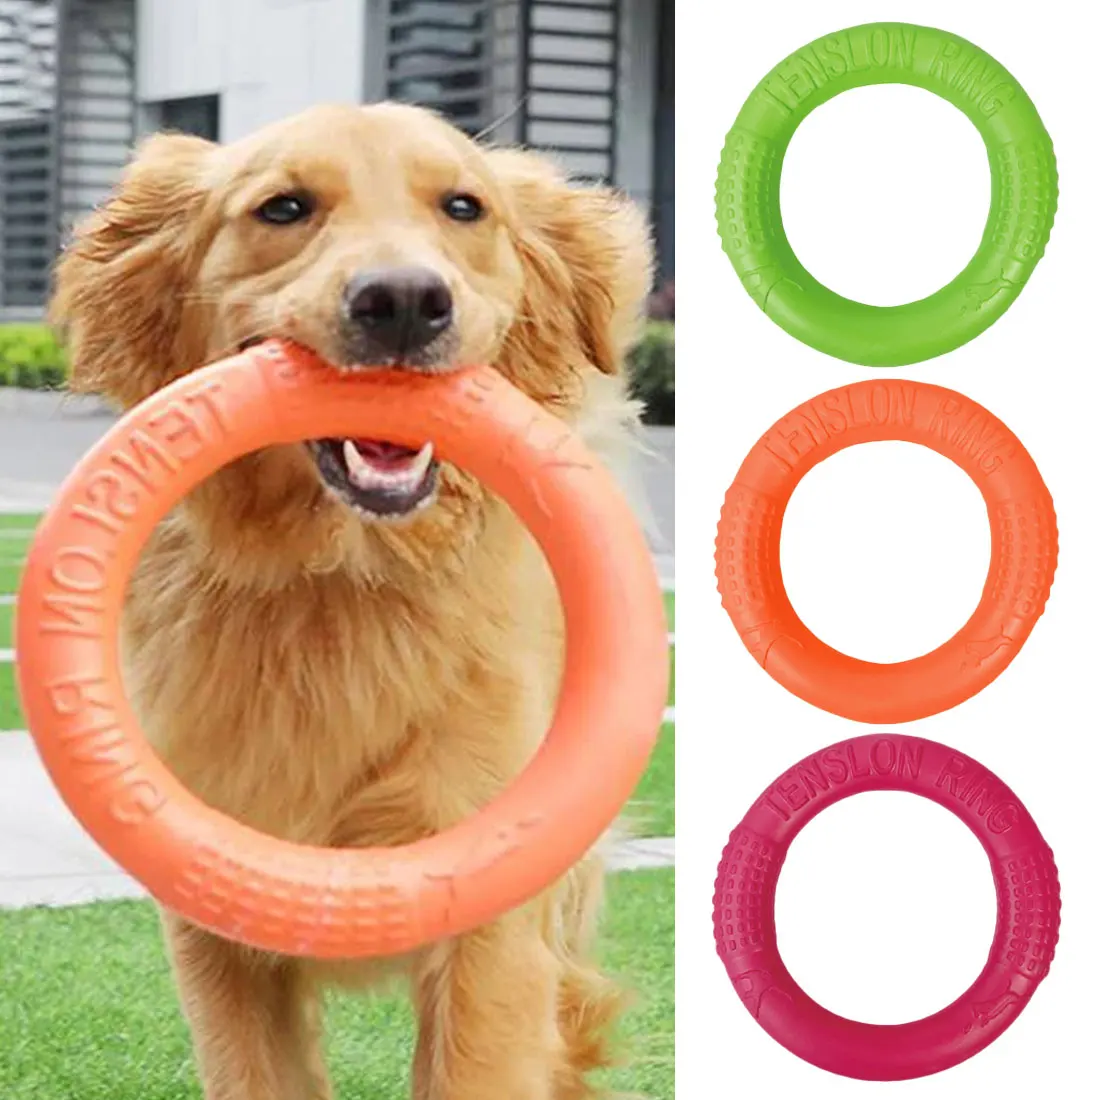 

Dog training ring EVA rally device bite-resistant floating toy puppies outdoor interactive game products supply pet outdoor game